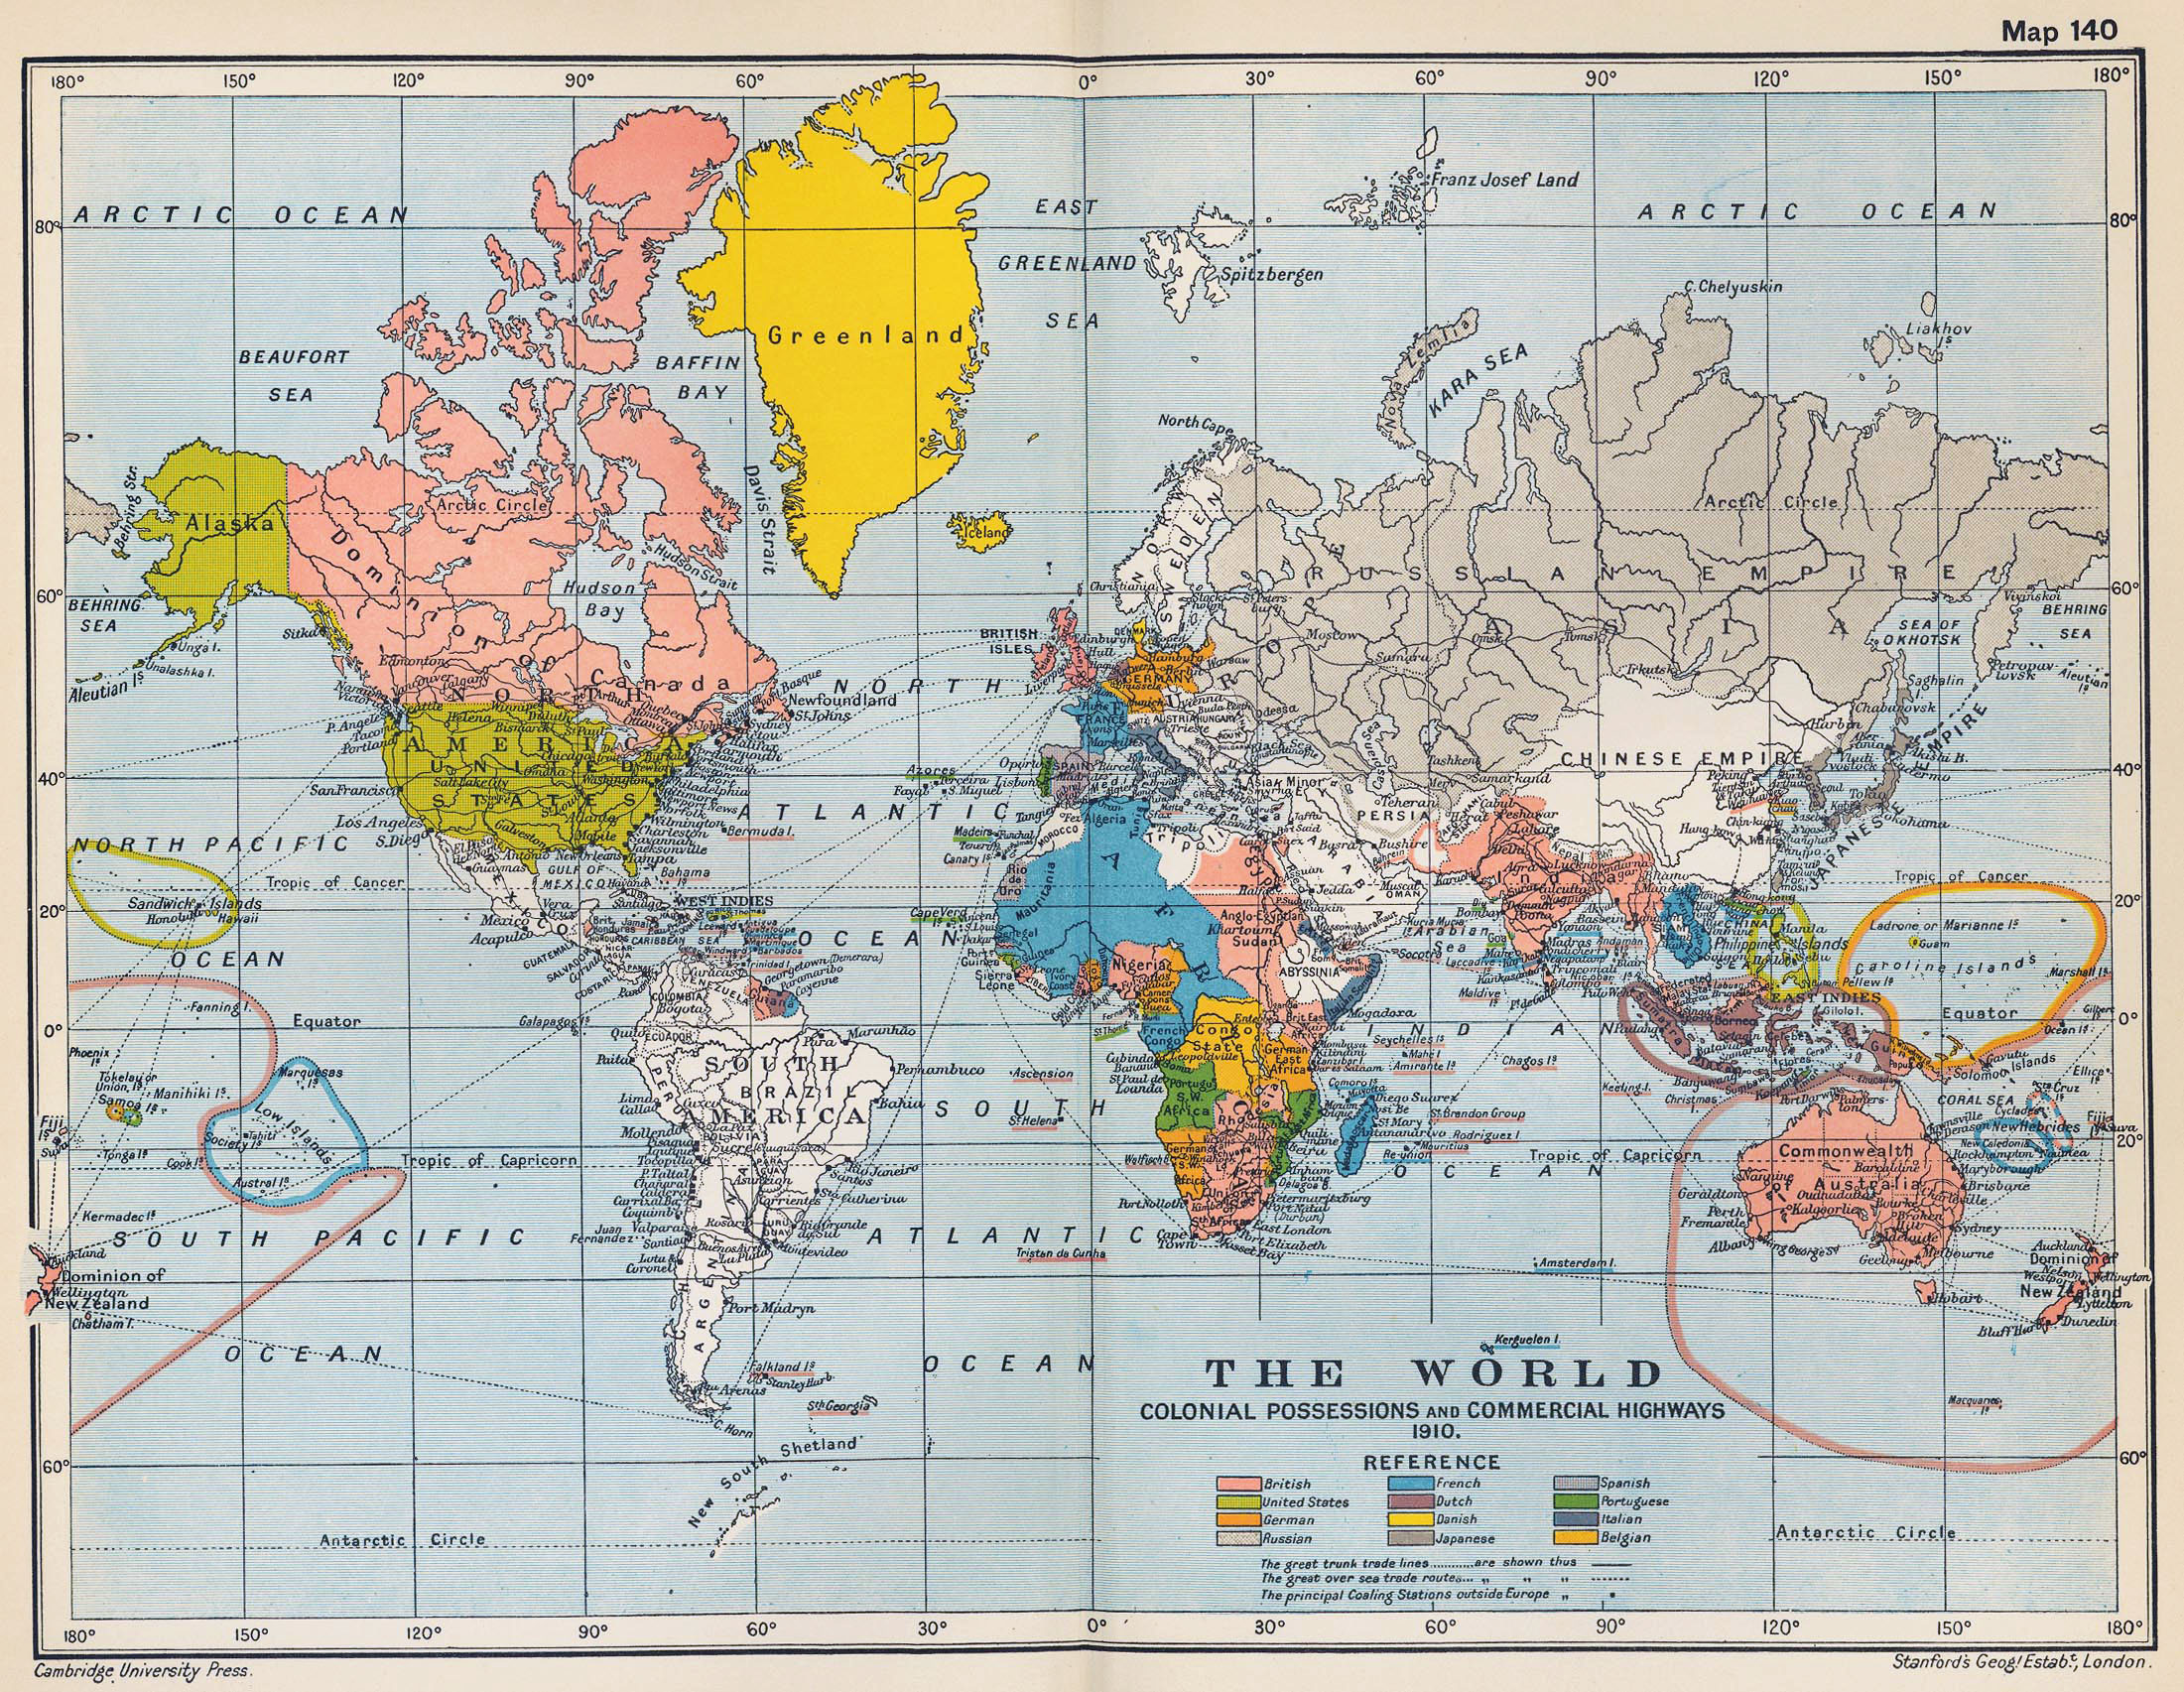 Large Old Political Map Of The World 1910 Old Maps Of The World World Mapsland Maps Of The World